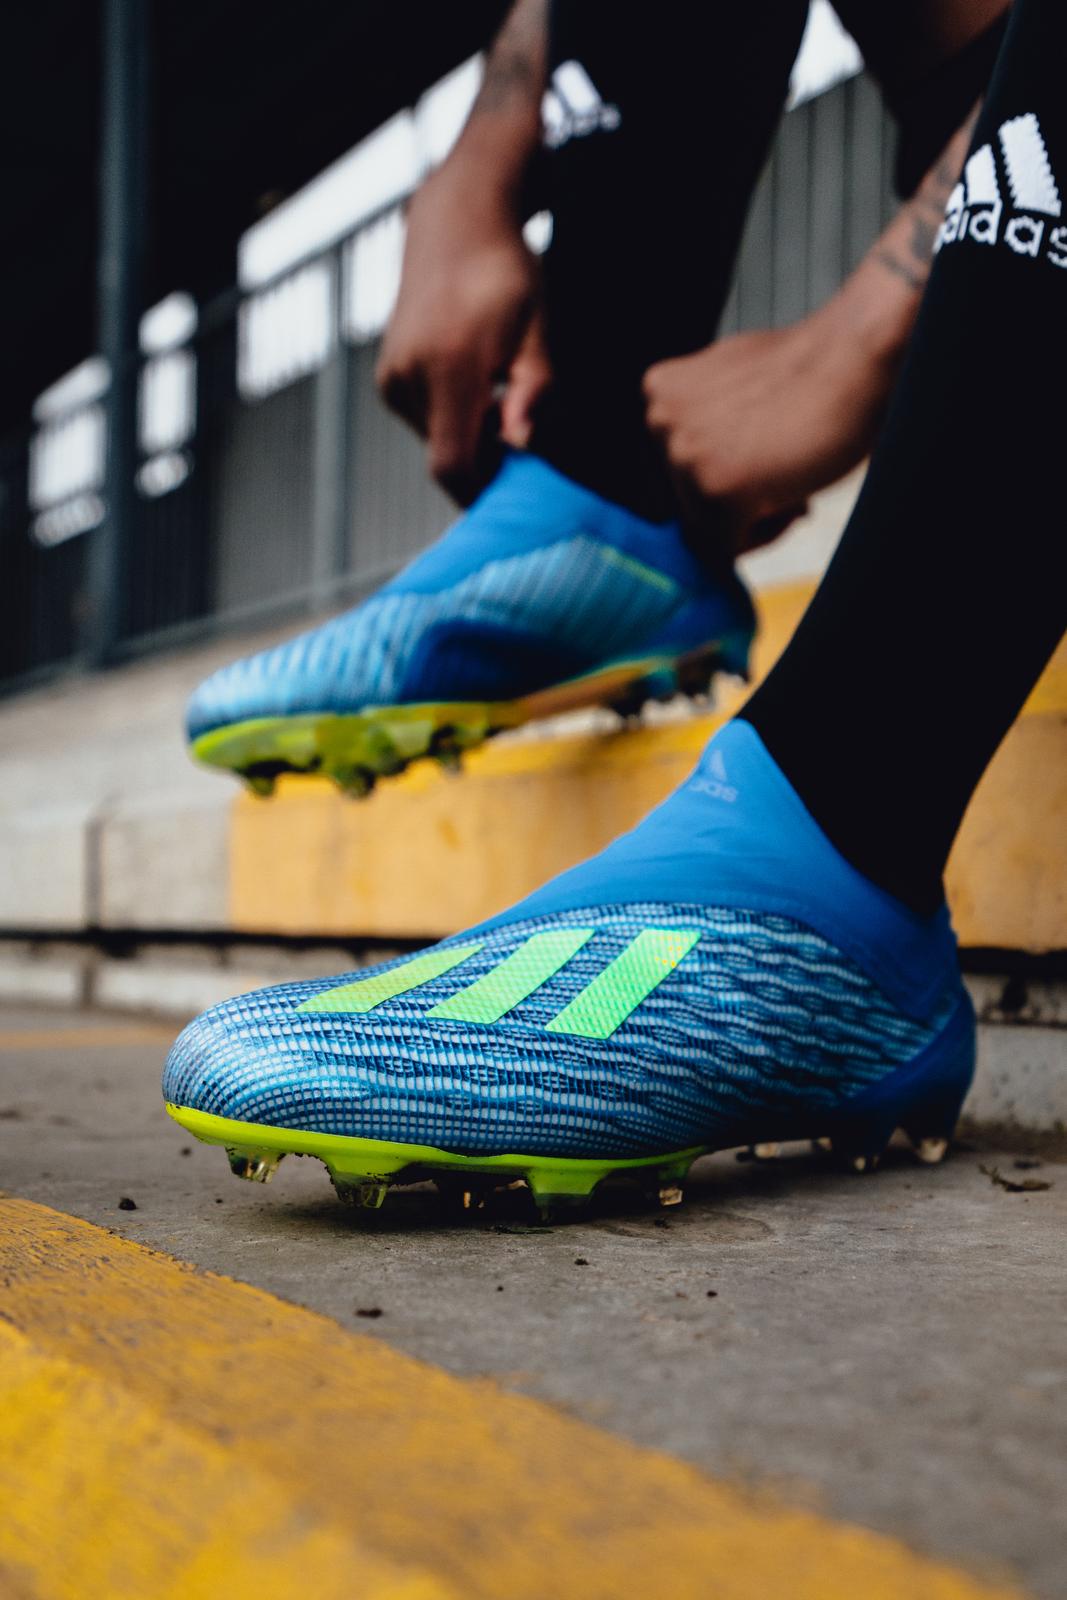 Laceless Adidas X World Cup Launch Boots Released - Footy Headlines